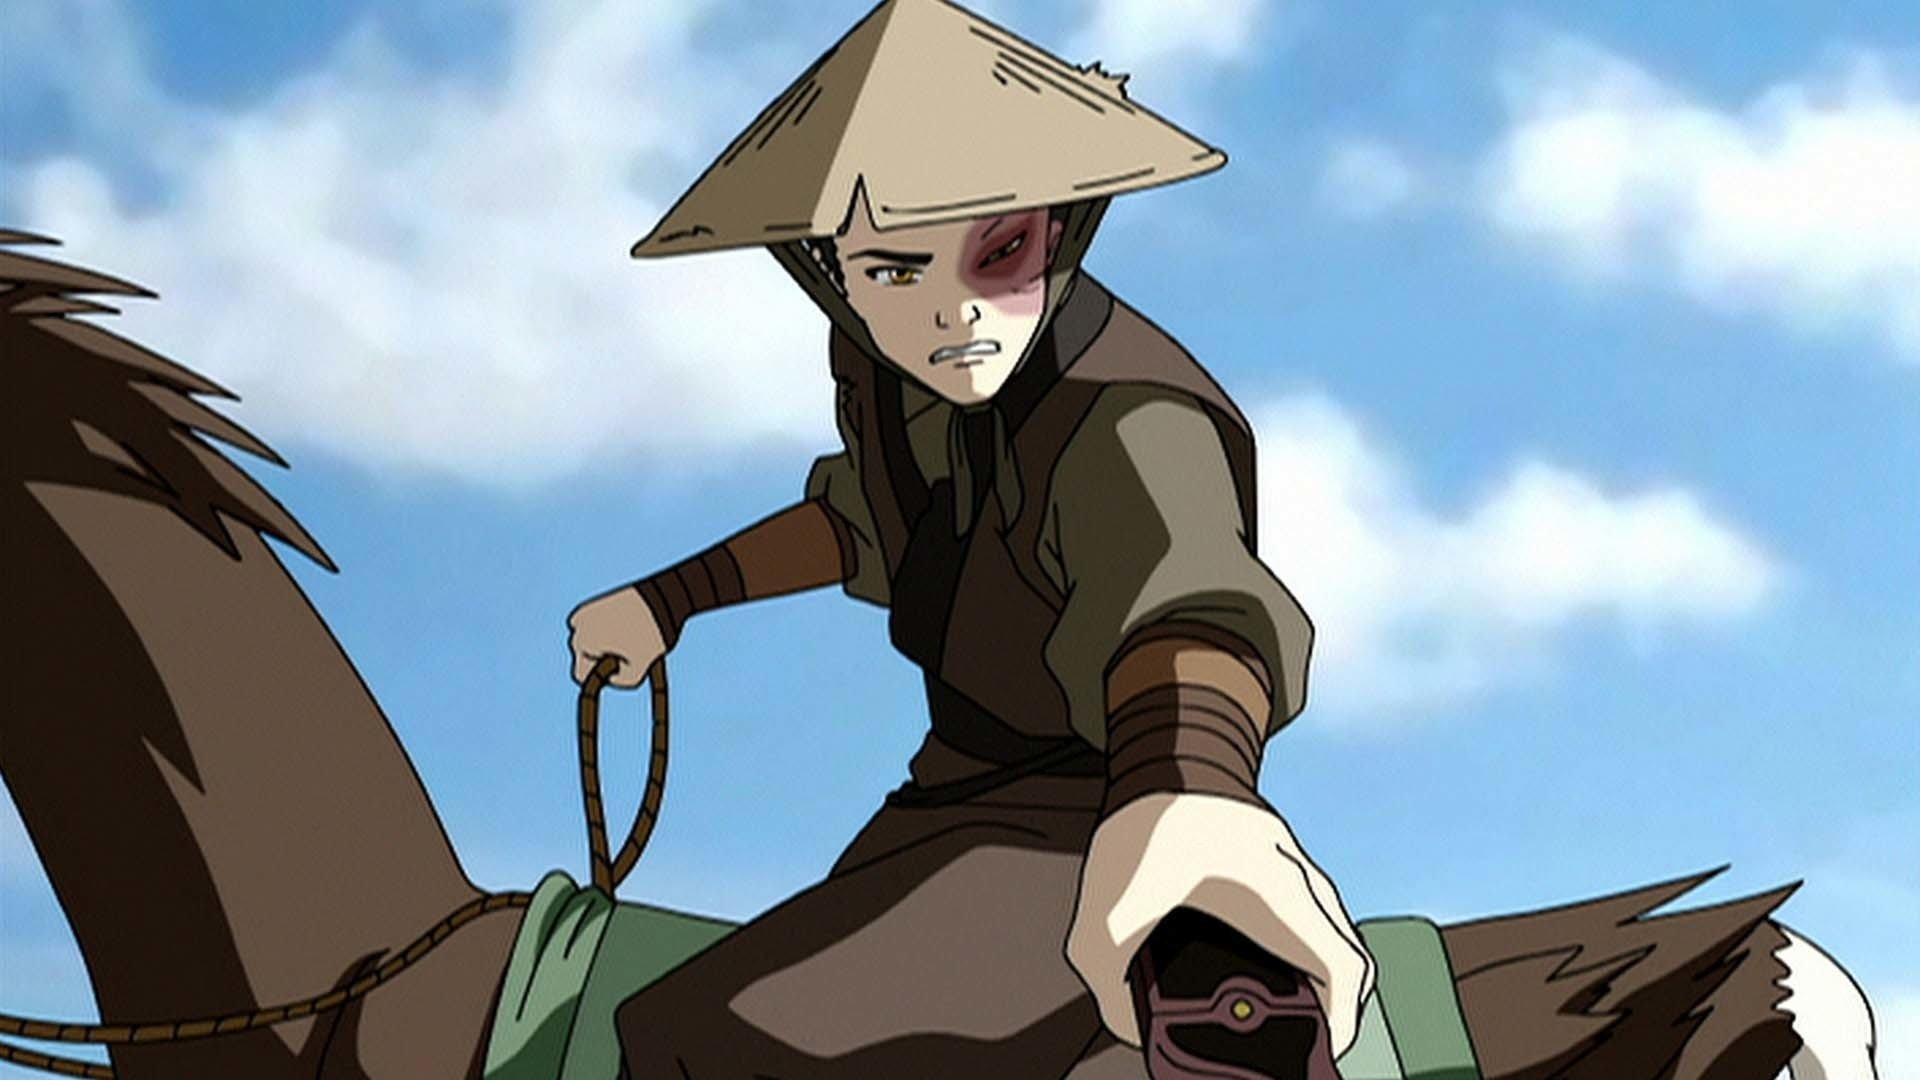 avatar the last airbender book 2 episode 11 watch anime dub